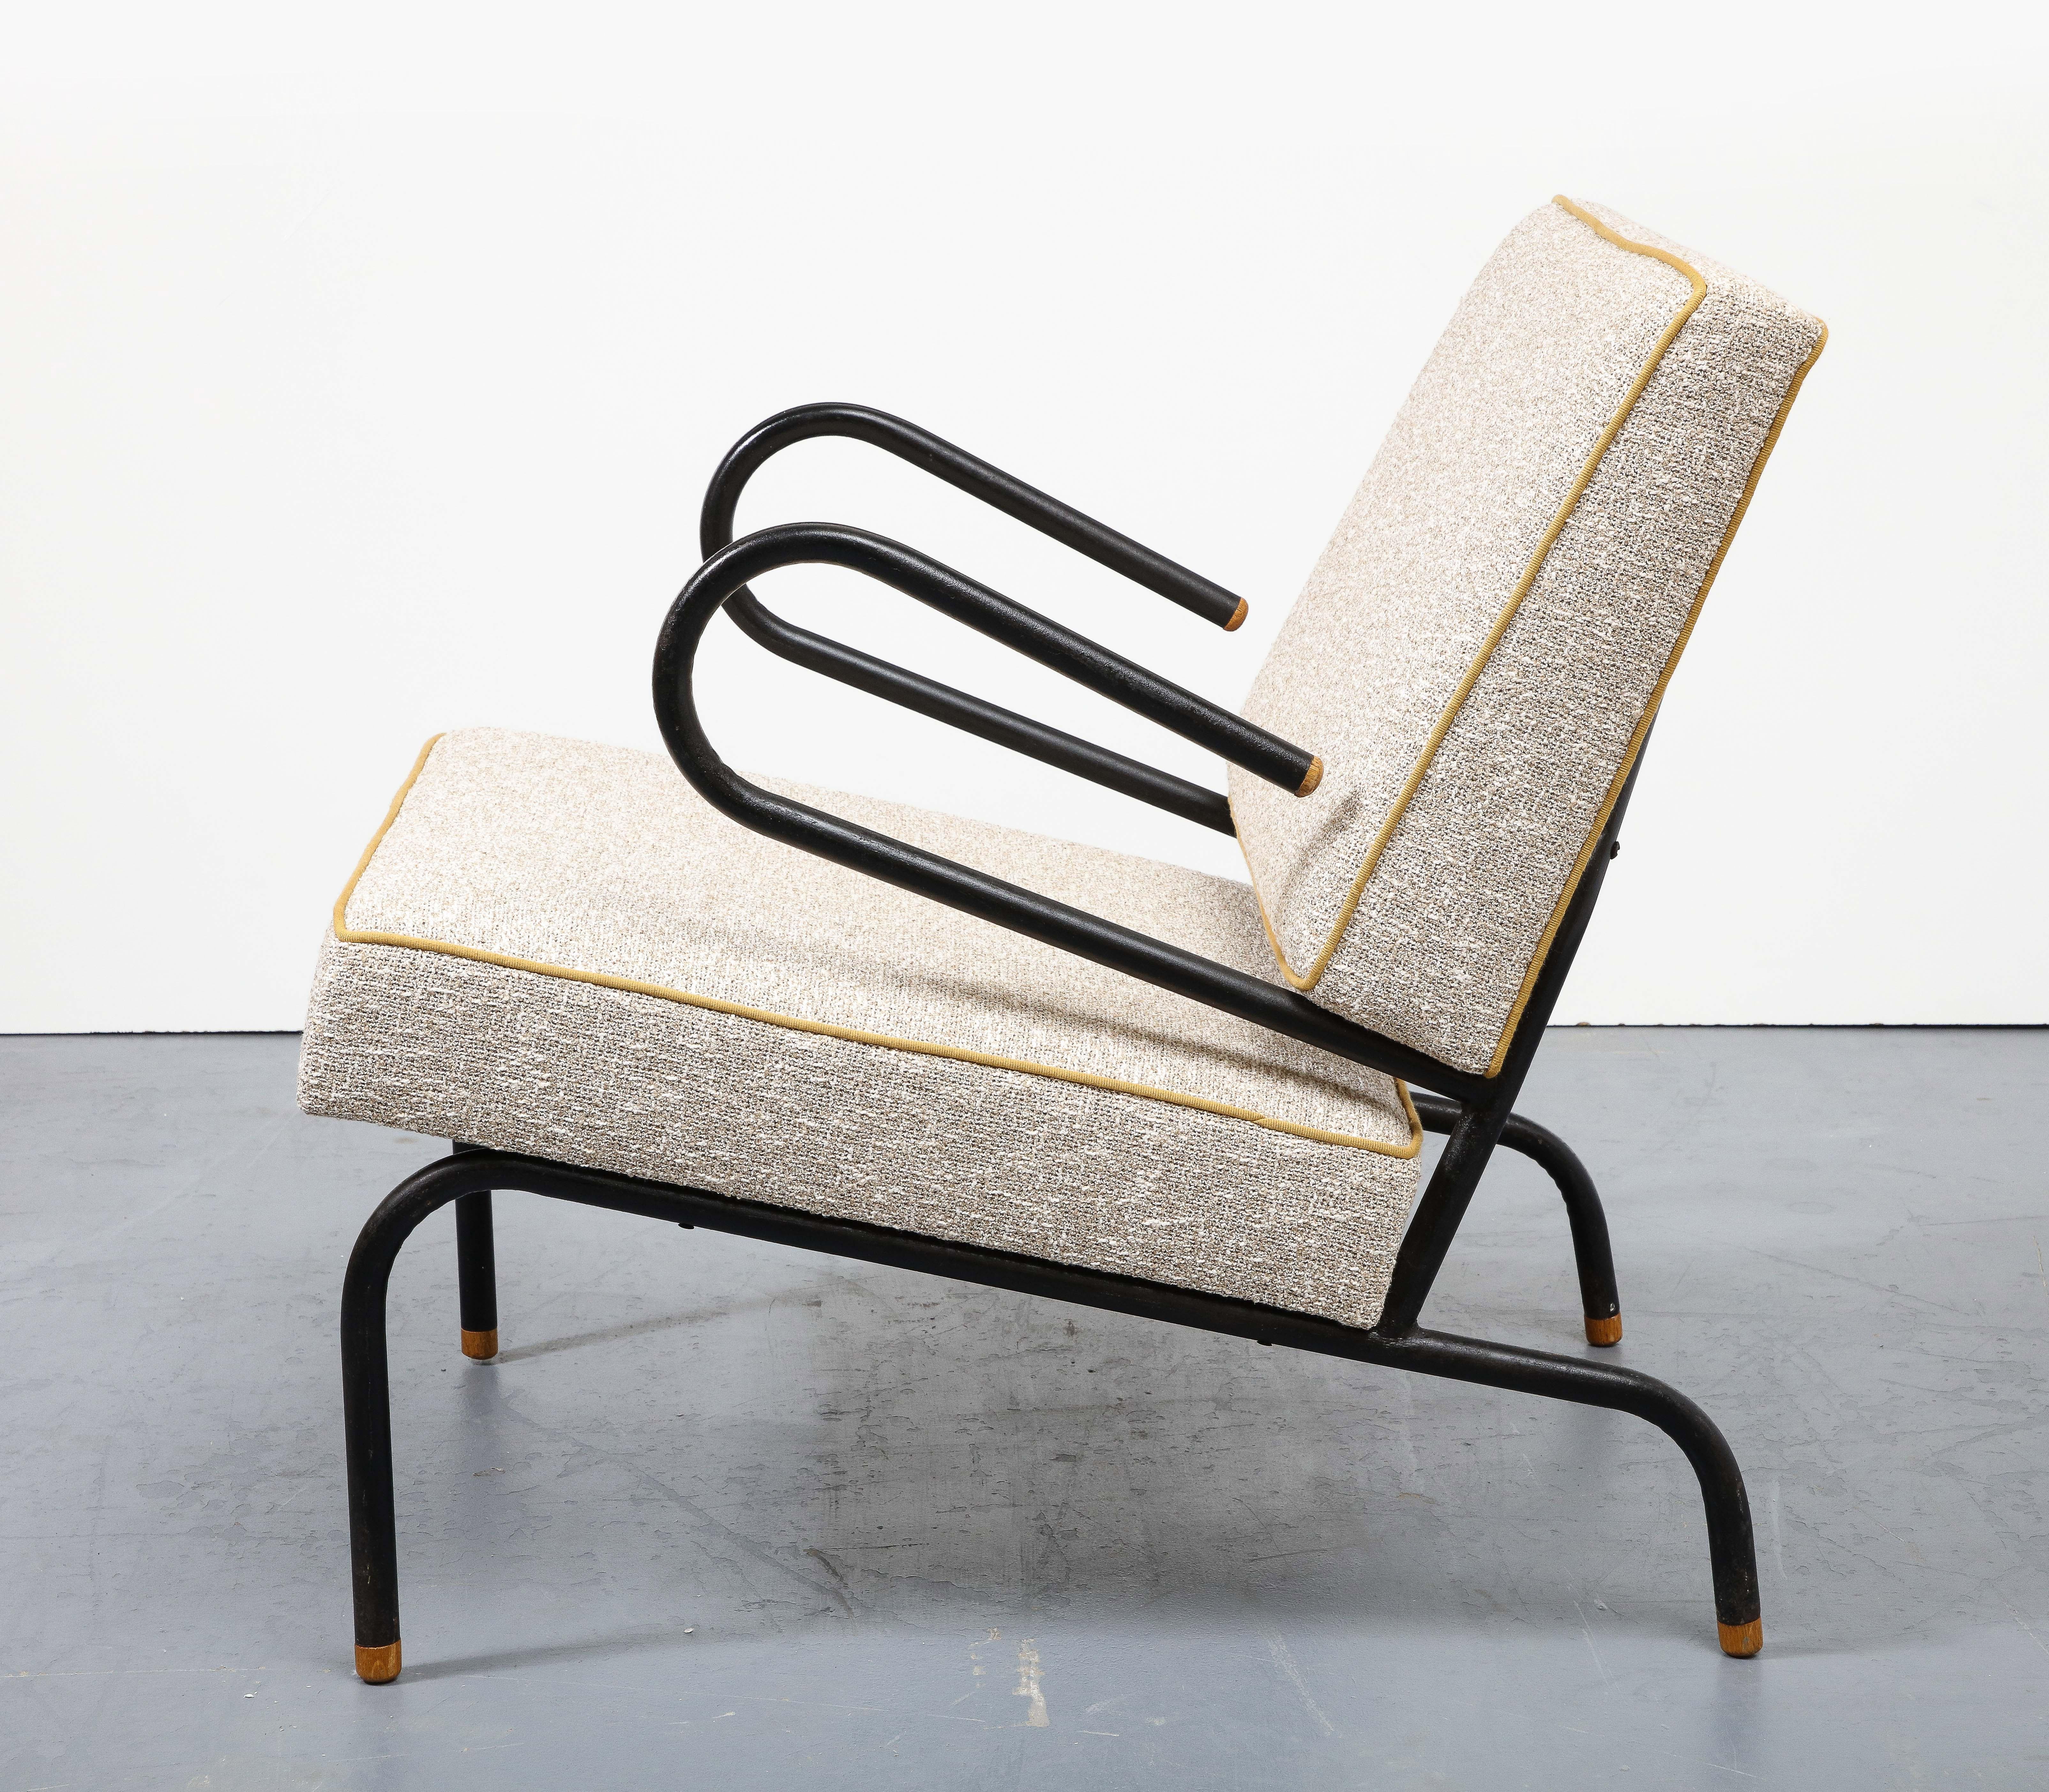 Bent Steel Lounge Chair by Jacques Hitier for Tubauto, France, c. 1955 For Sale 6